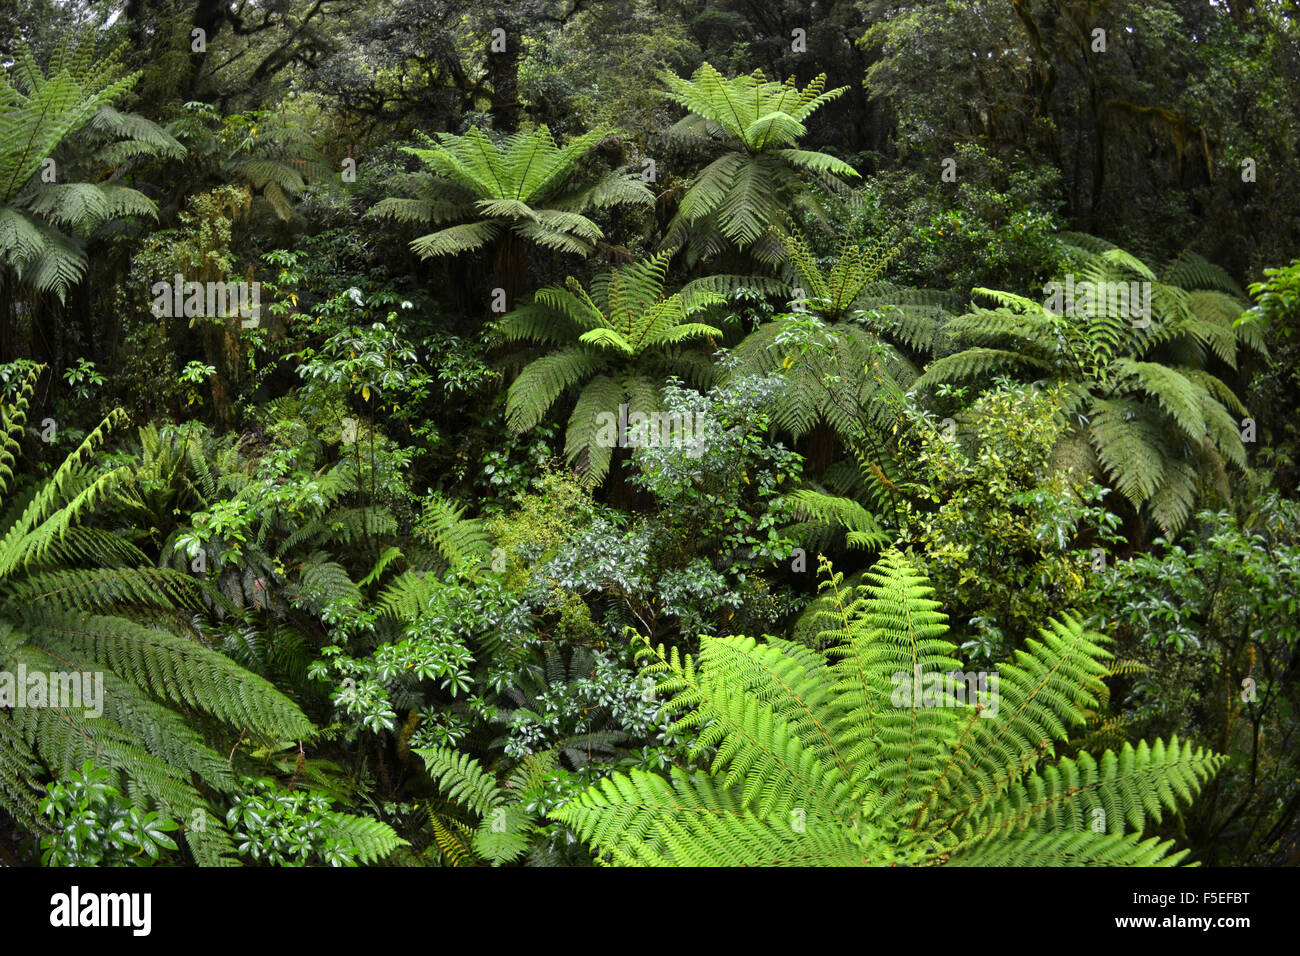 Fern forest at 'The Chasm', Milford Sound, Fiordland National Park, South Island, New Zealand Stock Photo